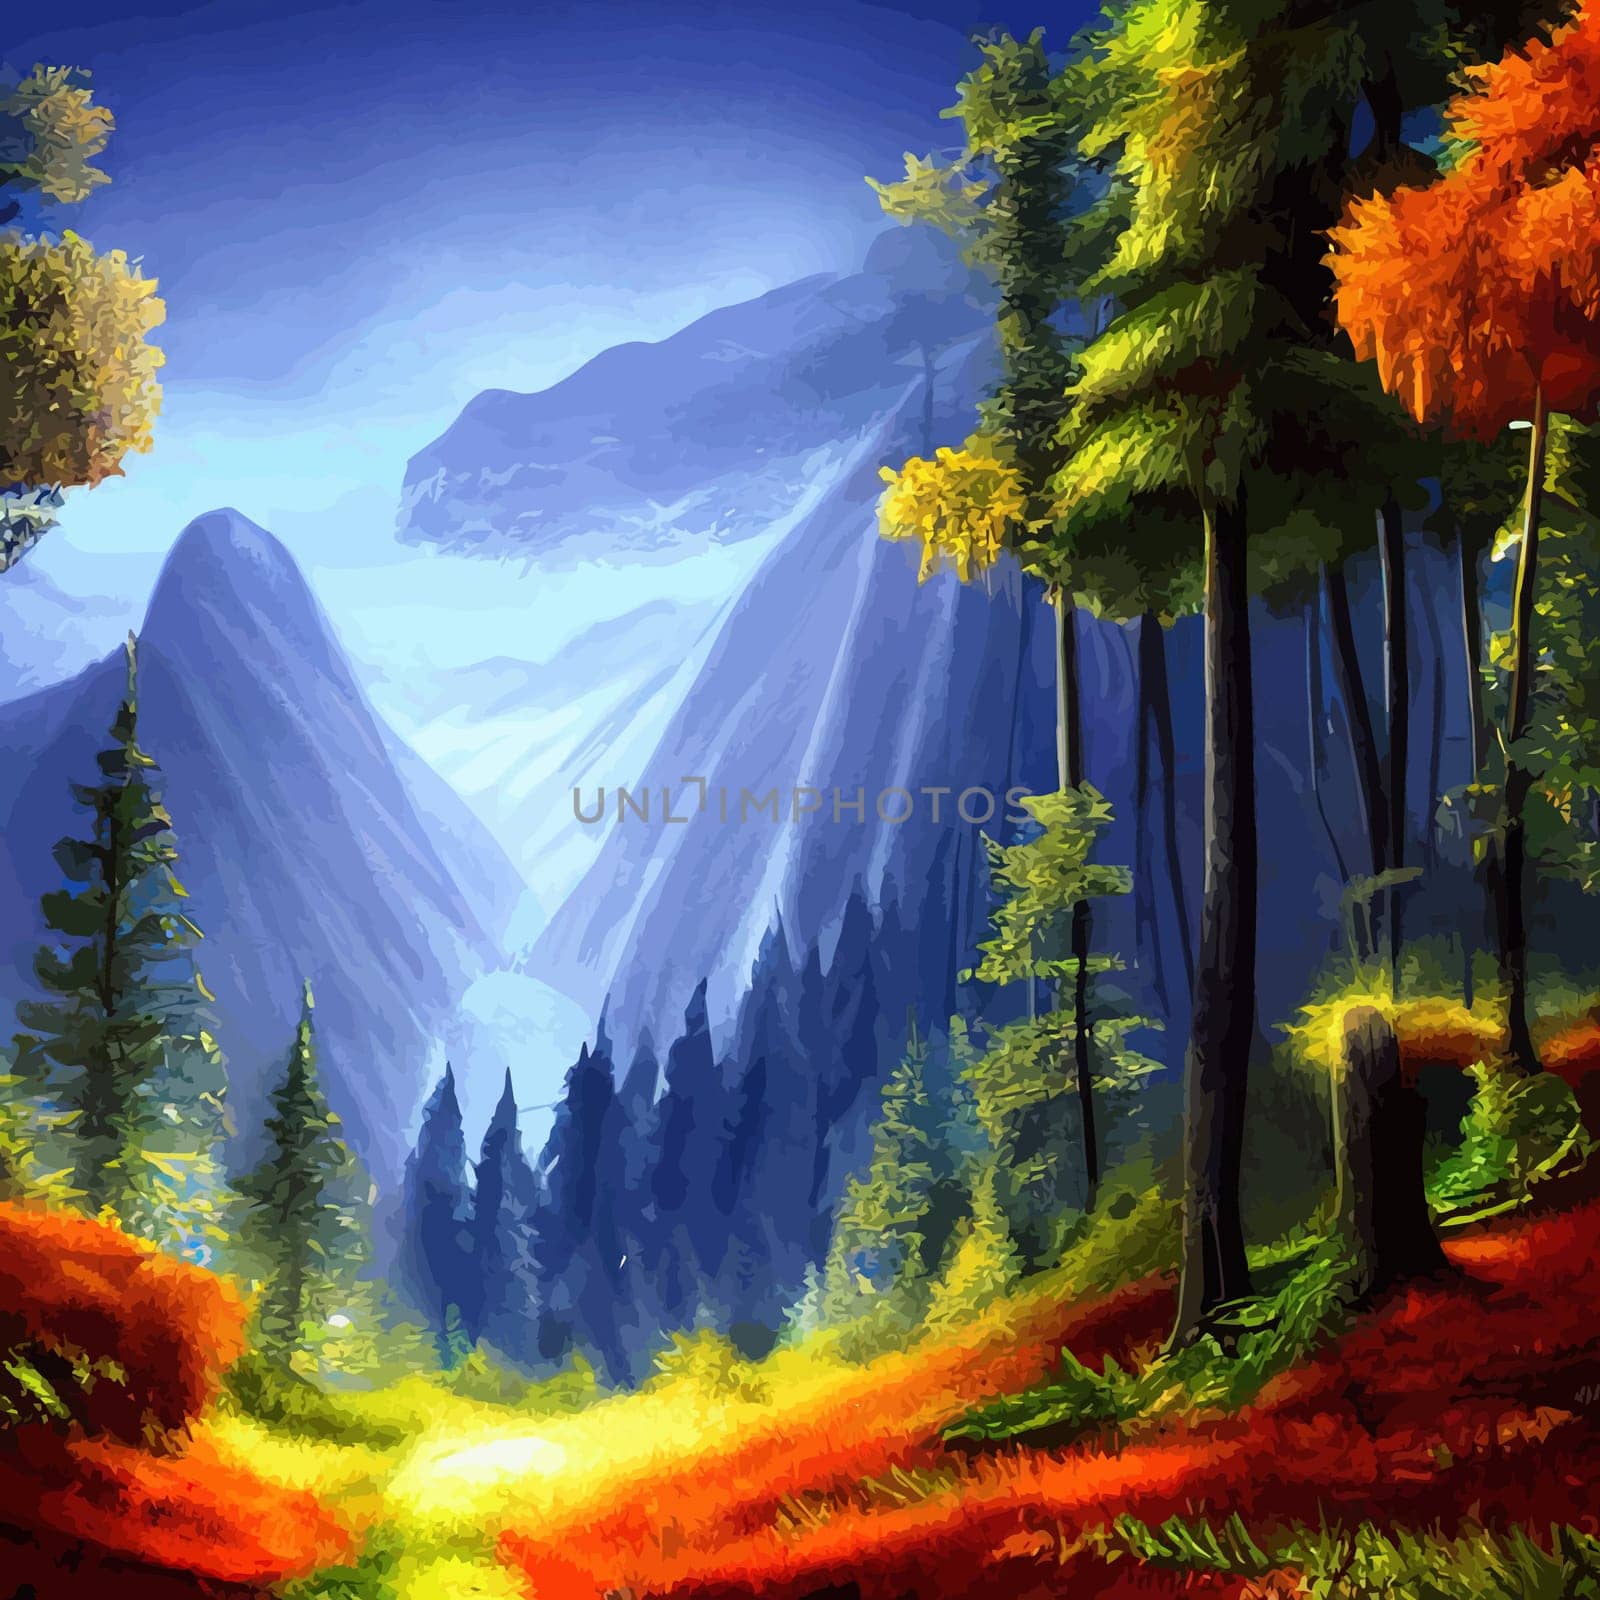 Nature and landscape. illustration trees, forests, mountains, plants. Image for background, card or cover by kasynets_olena